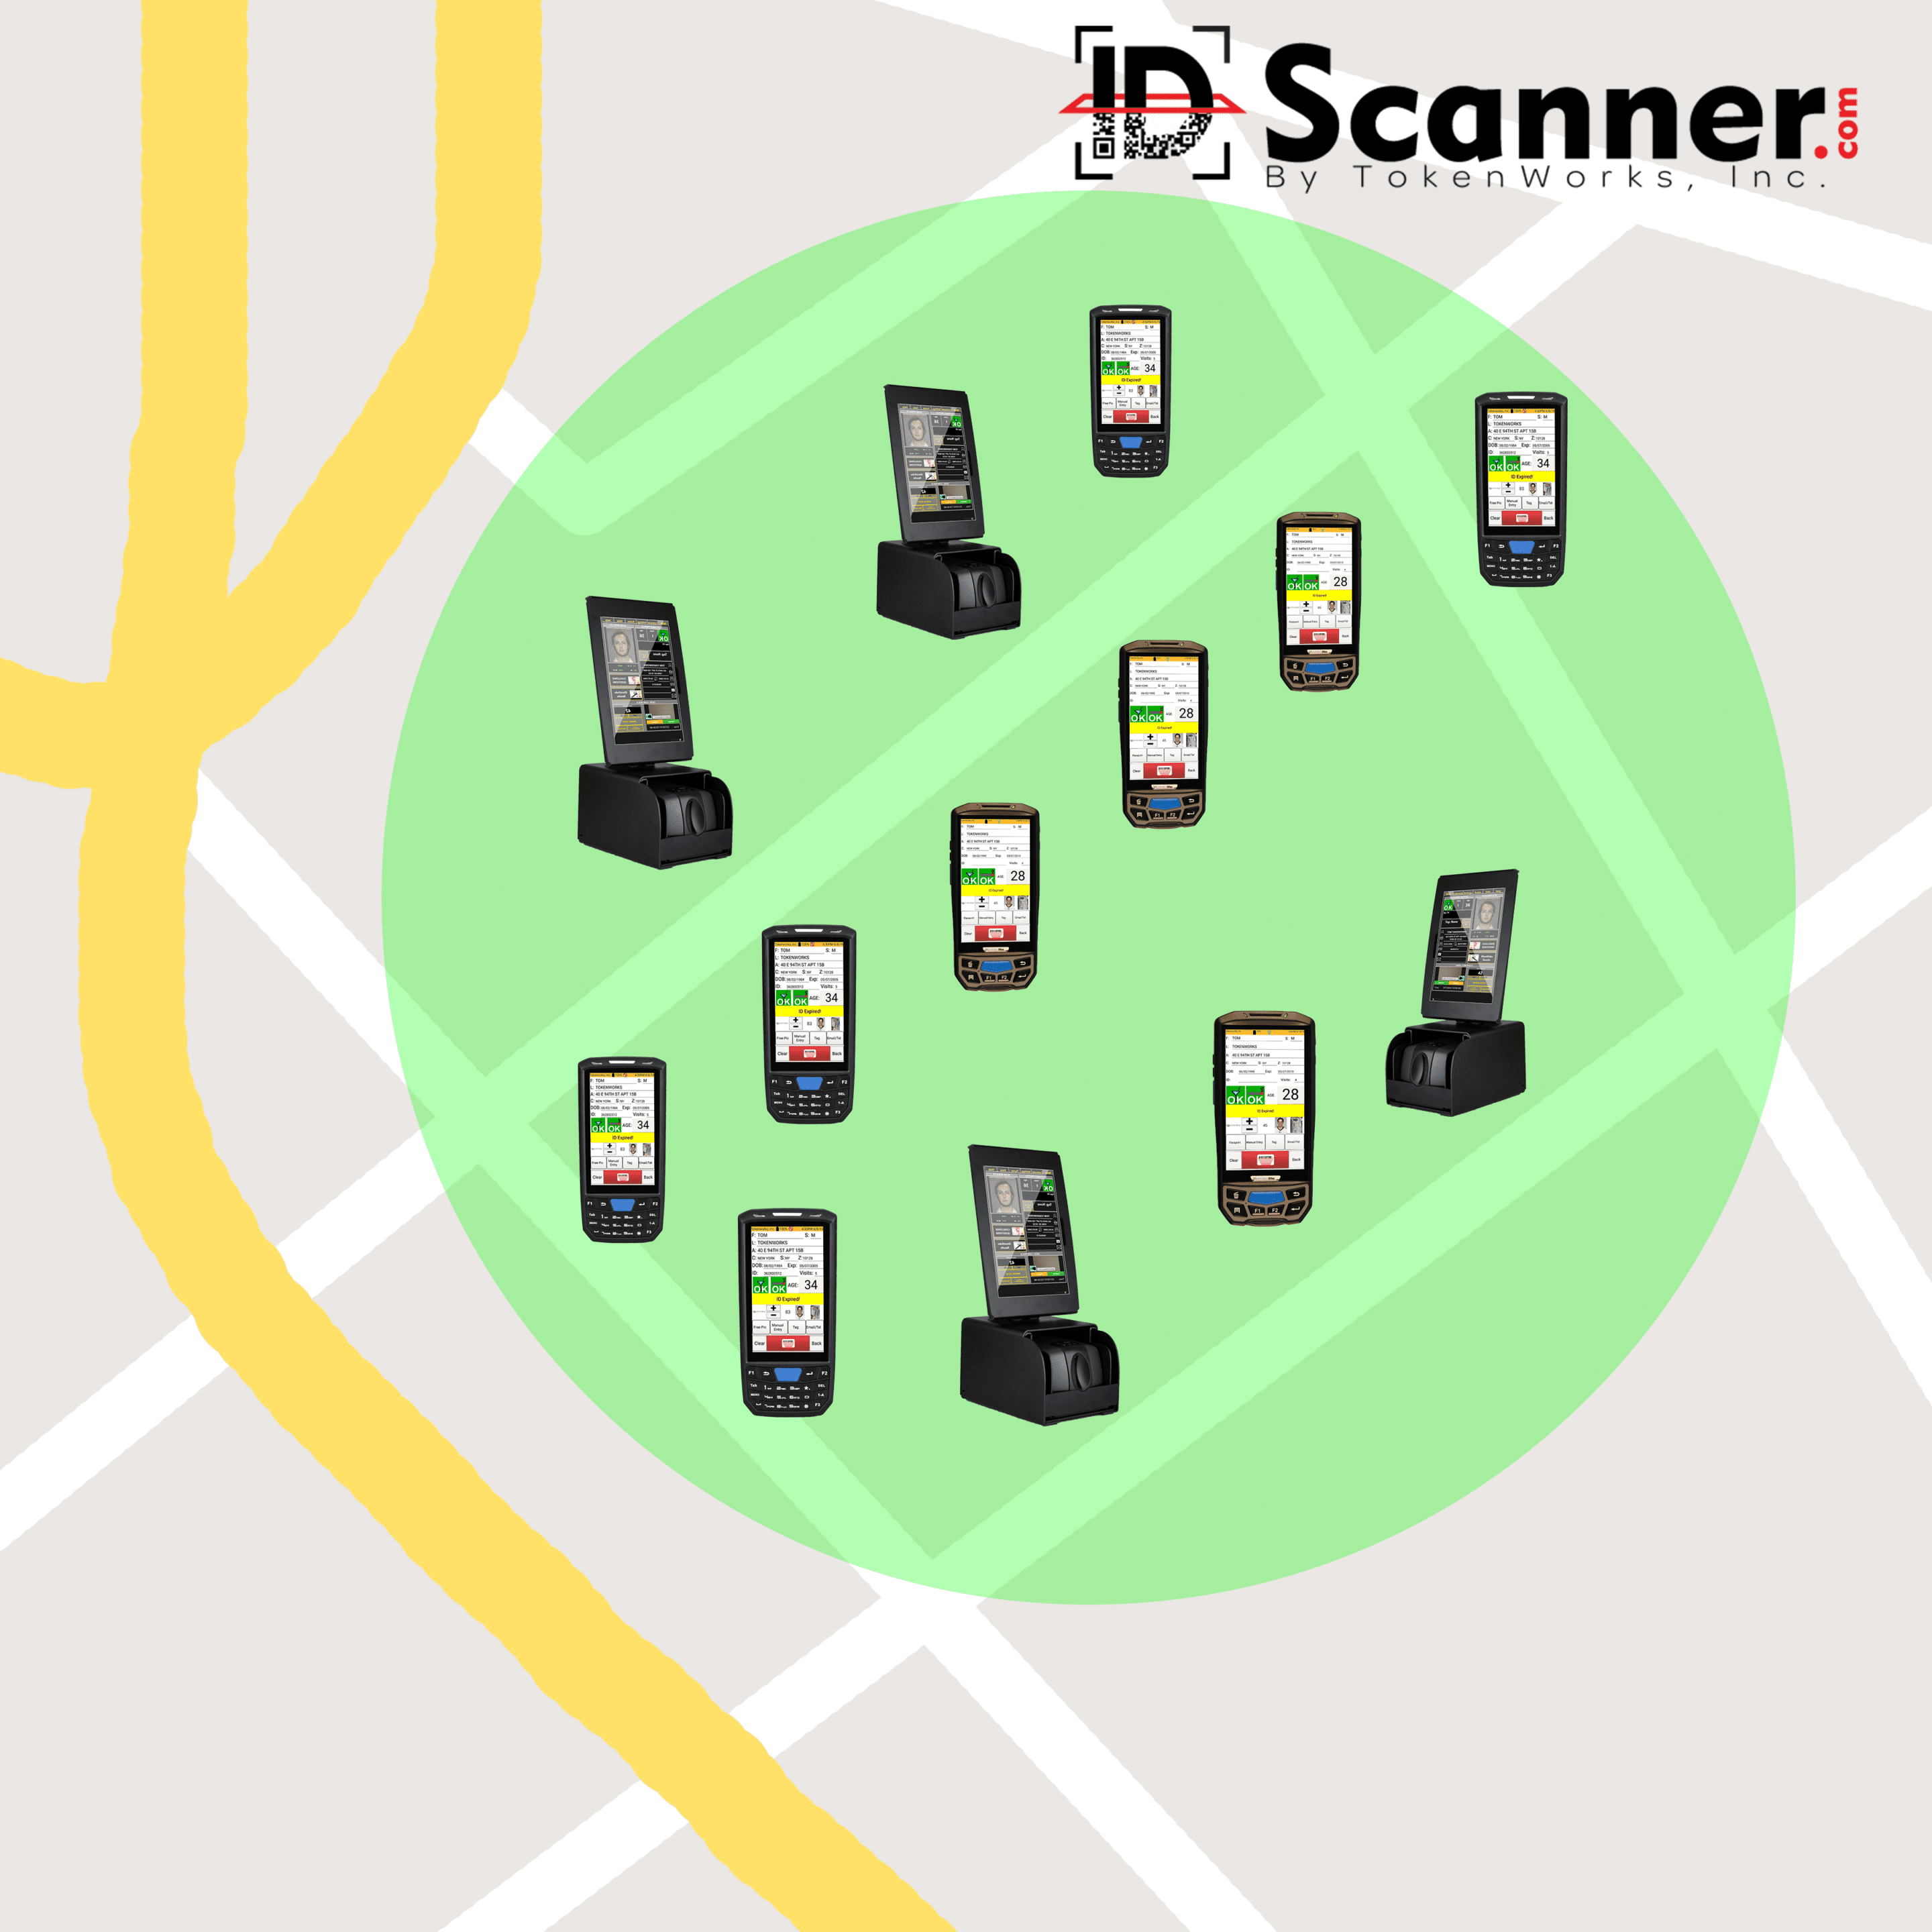 TokenWorks ID Scanner Safety Zone Map Diagram - goal for nightlife public safety